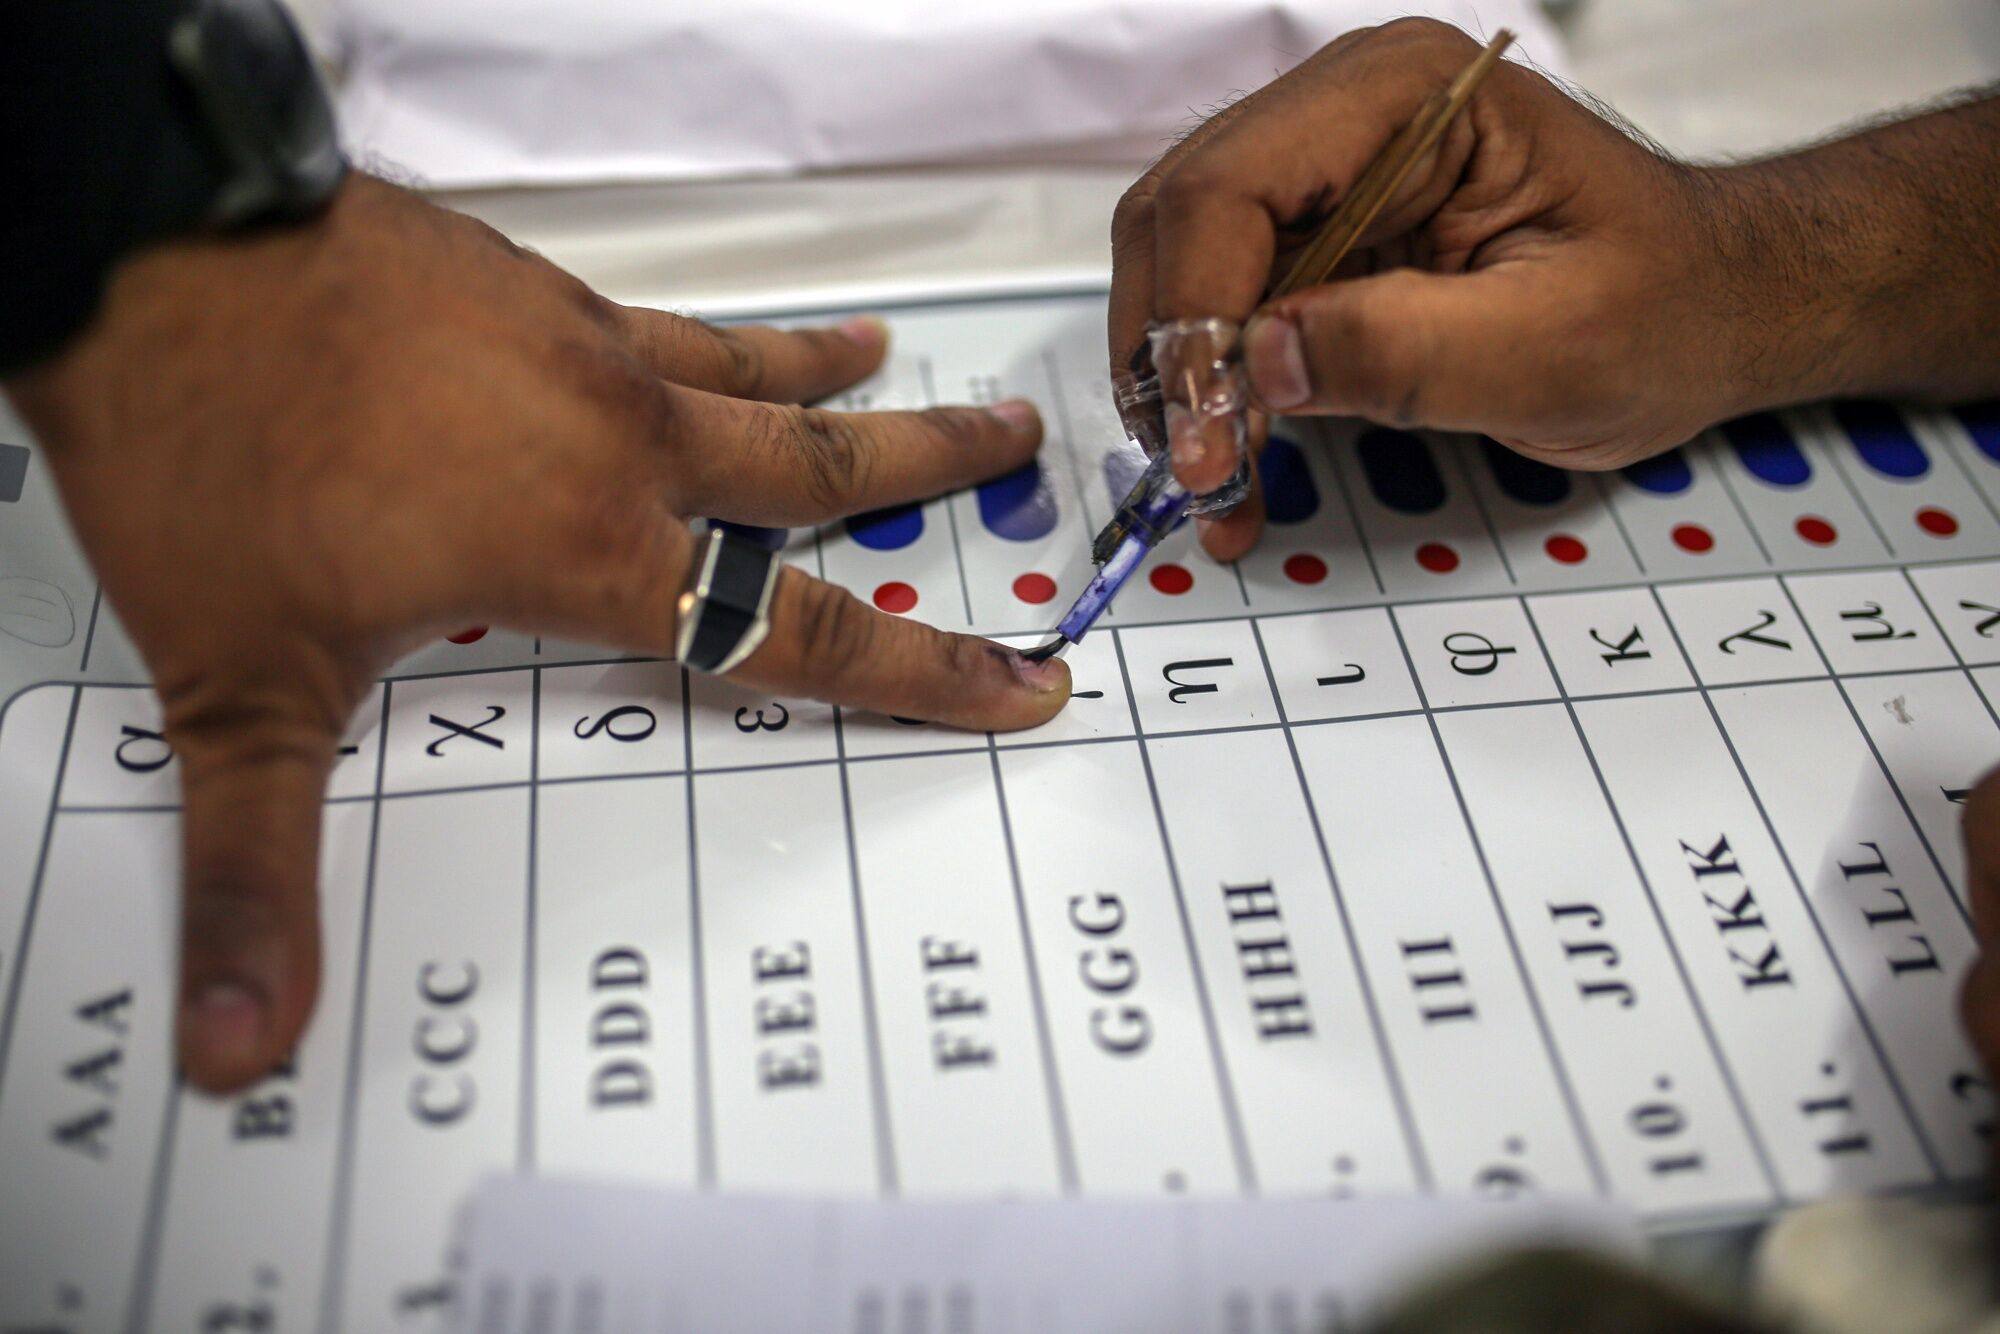 A voter’s finger is marked with indelible ink after casting a ballot at a polling station during national elections in Ahmedabad, Gujarat, India. Photo: Bloomberg